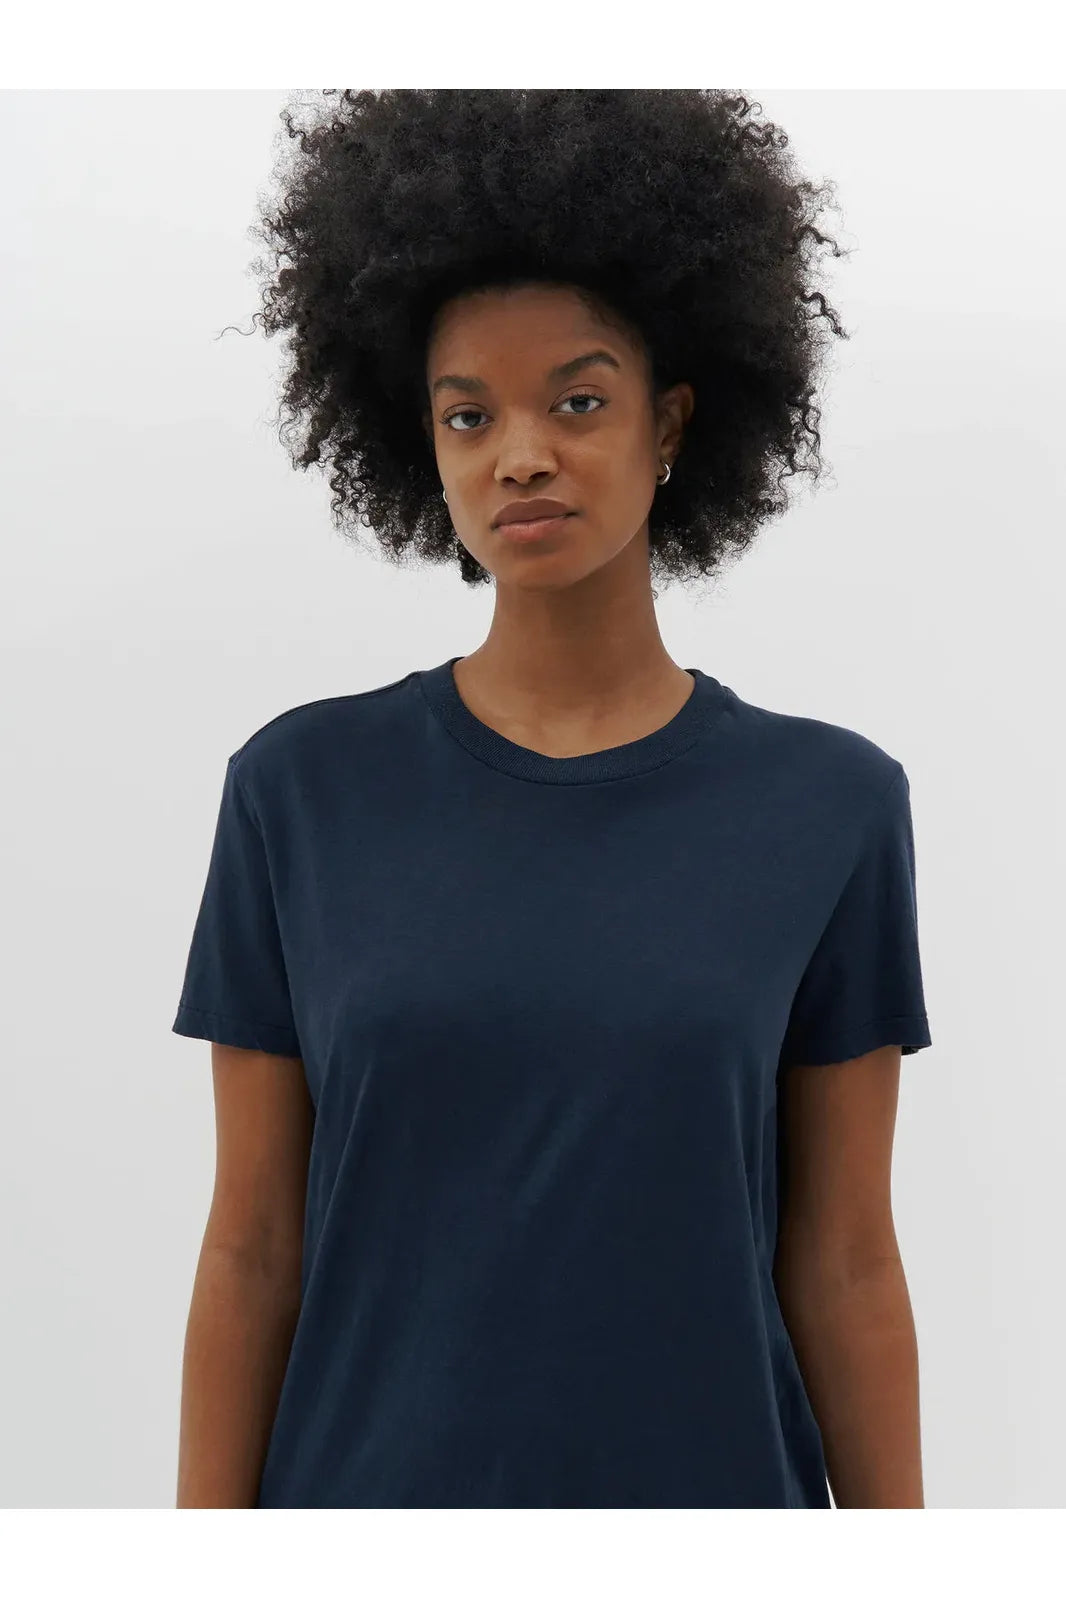 Regular Classic Short Sleeve T-shirt in Prussian Blue by Bassike